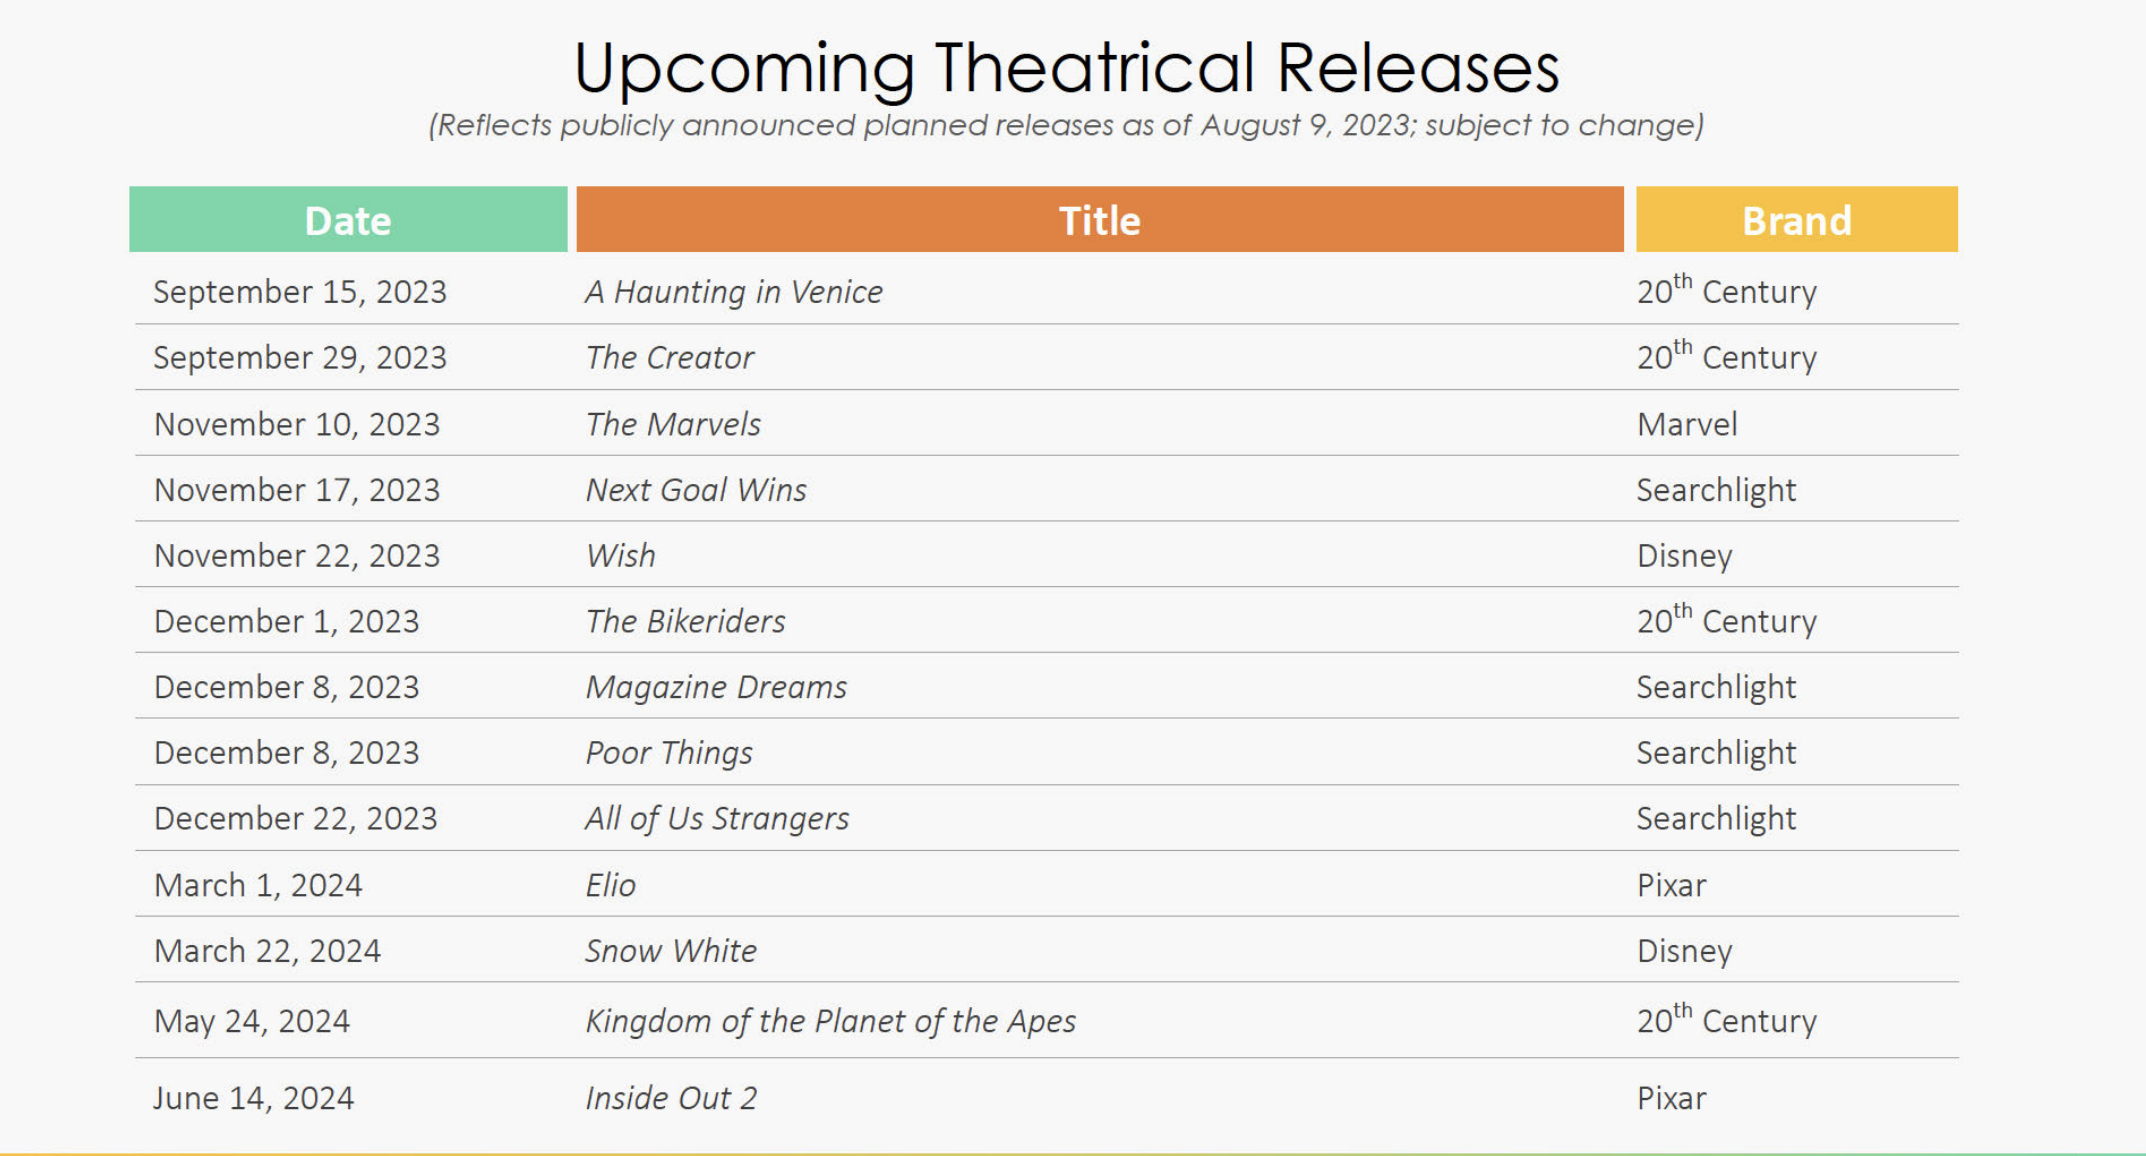 Disney Theatrical Release Schedule as of August 10th, 2023